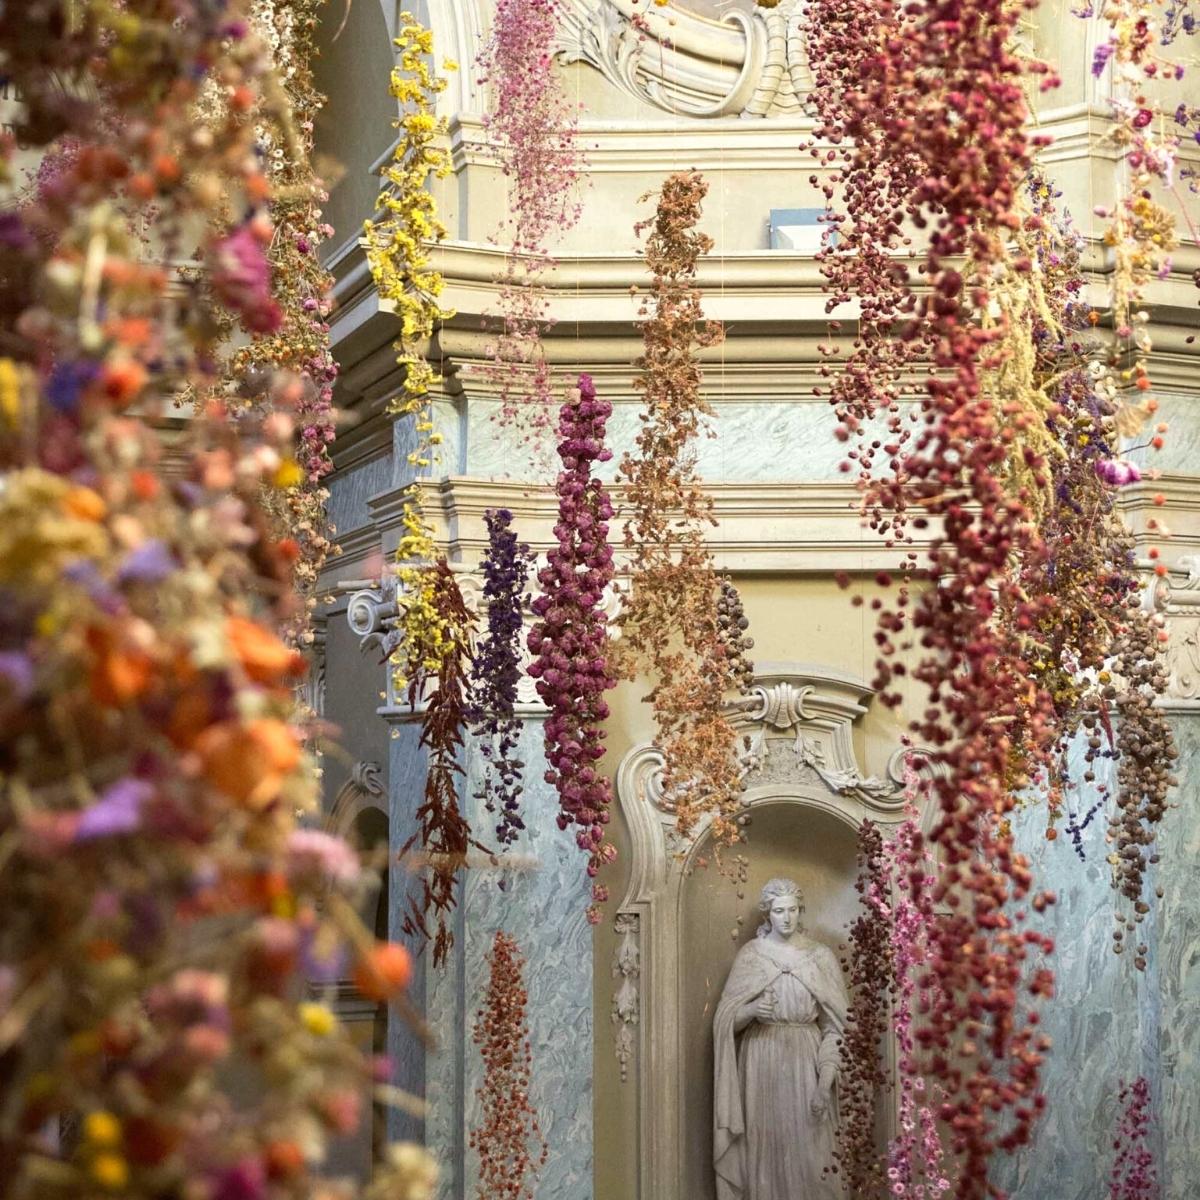 passageway-installations-made-with-dried-flowers-by-rebecca-louise-law-giving-everyone-the-wow-vibes-featured